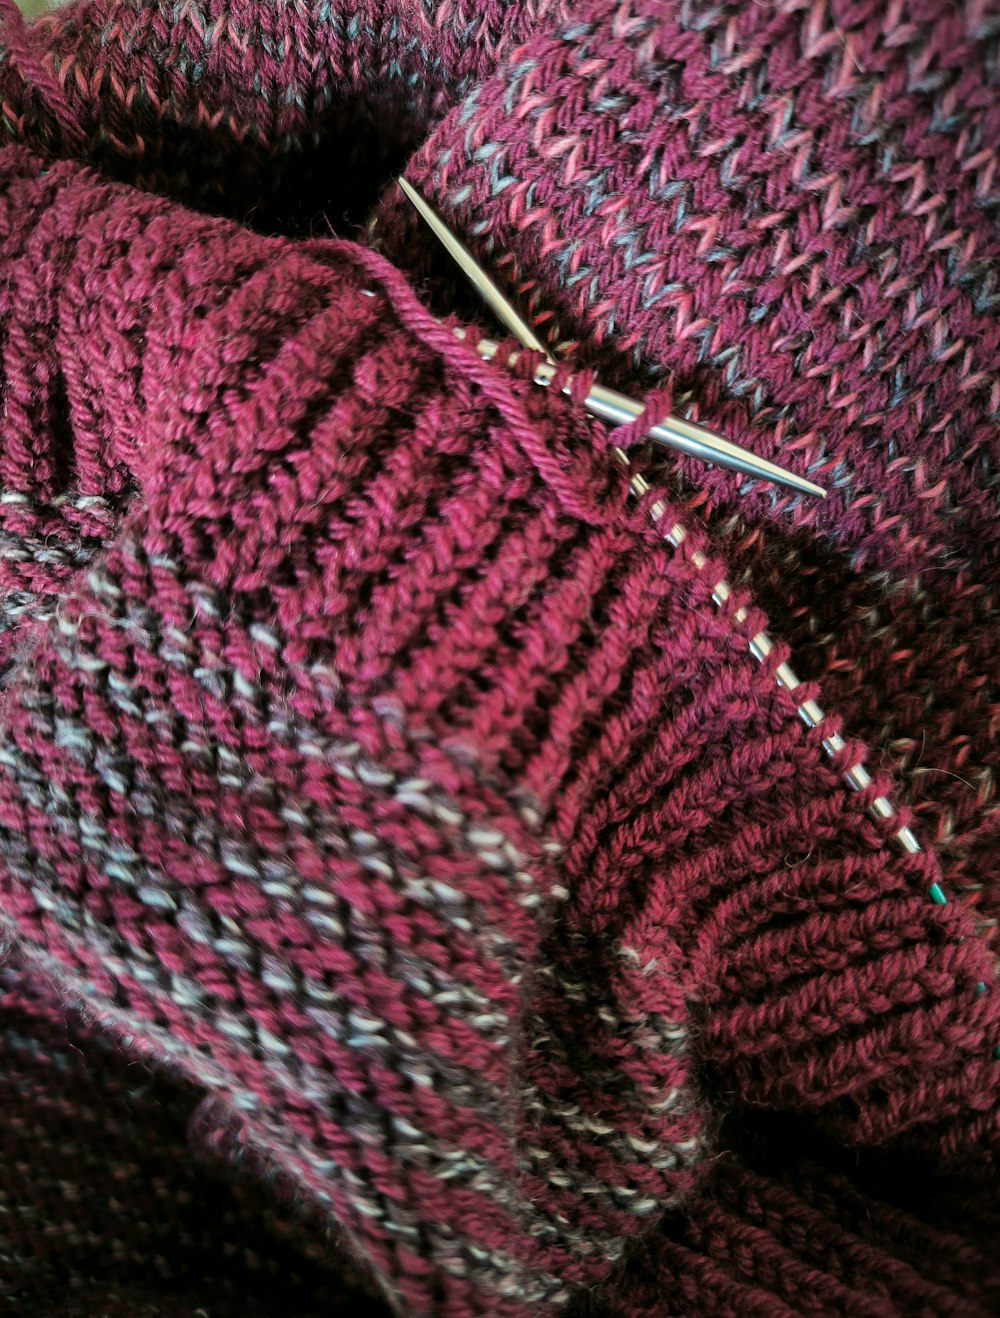 a close up of a knitted sweater with a pair of scissors